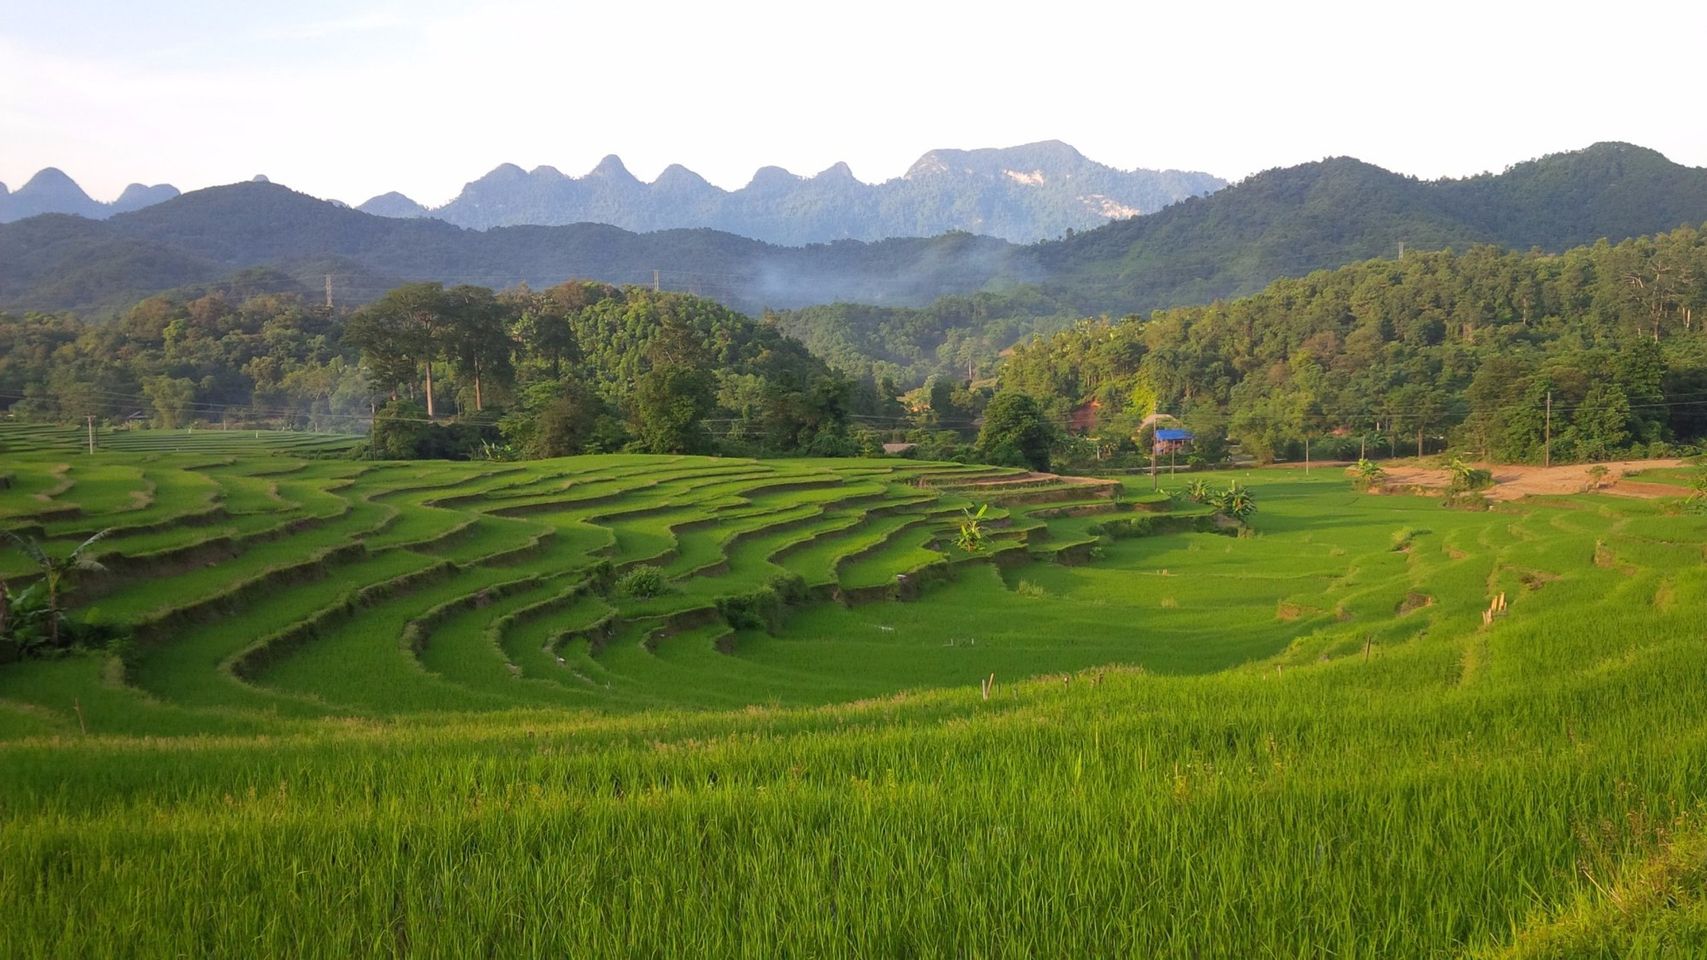 another terraced rice field